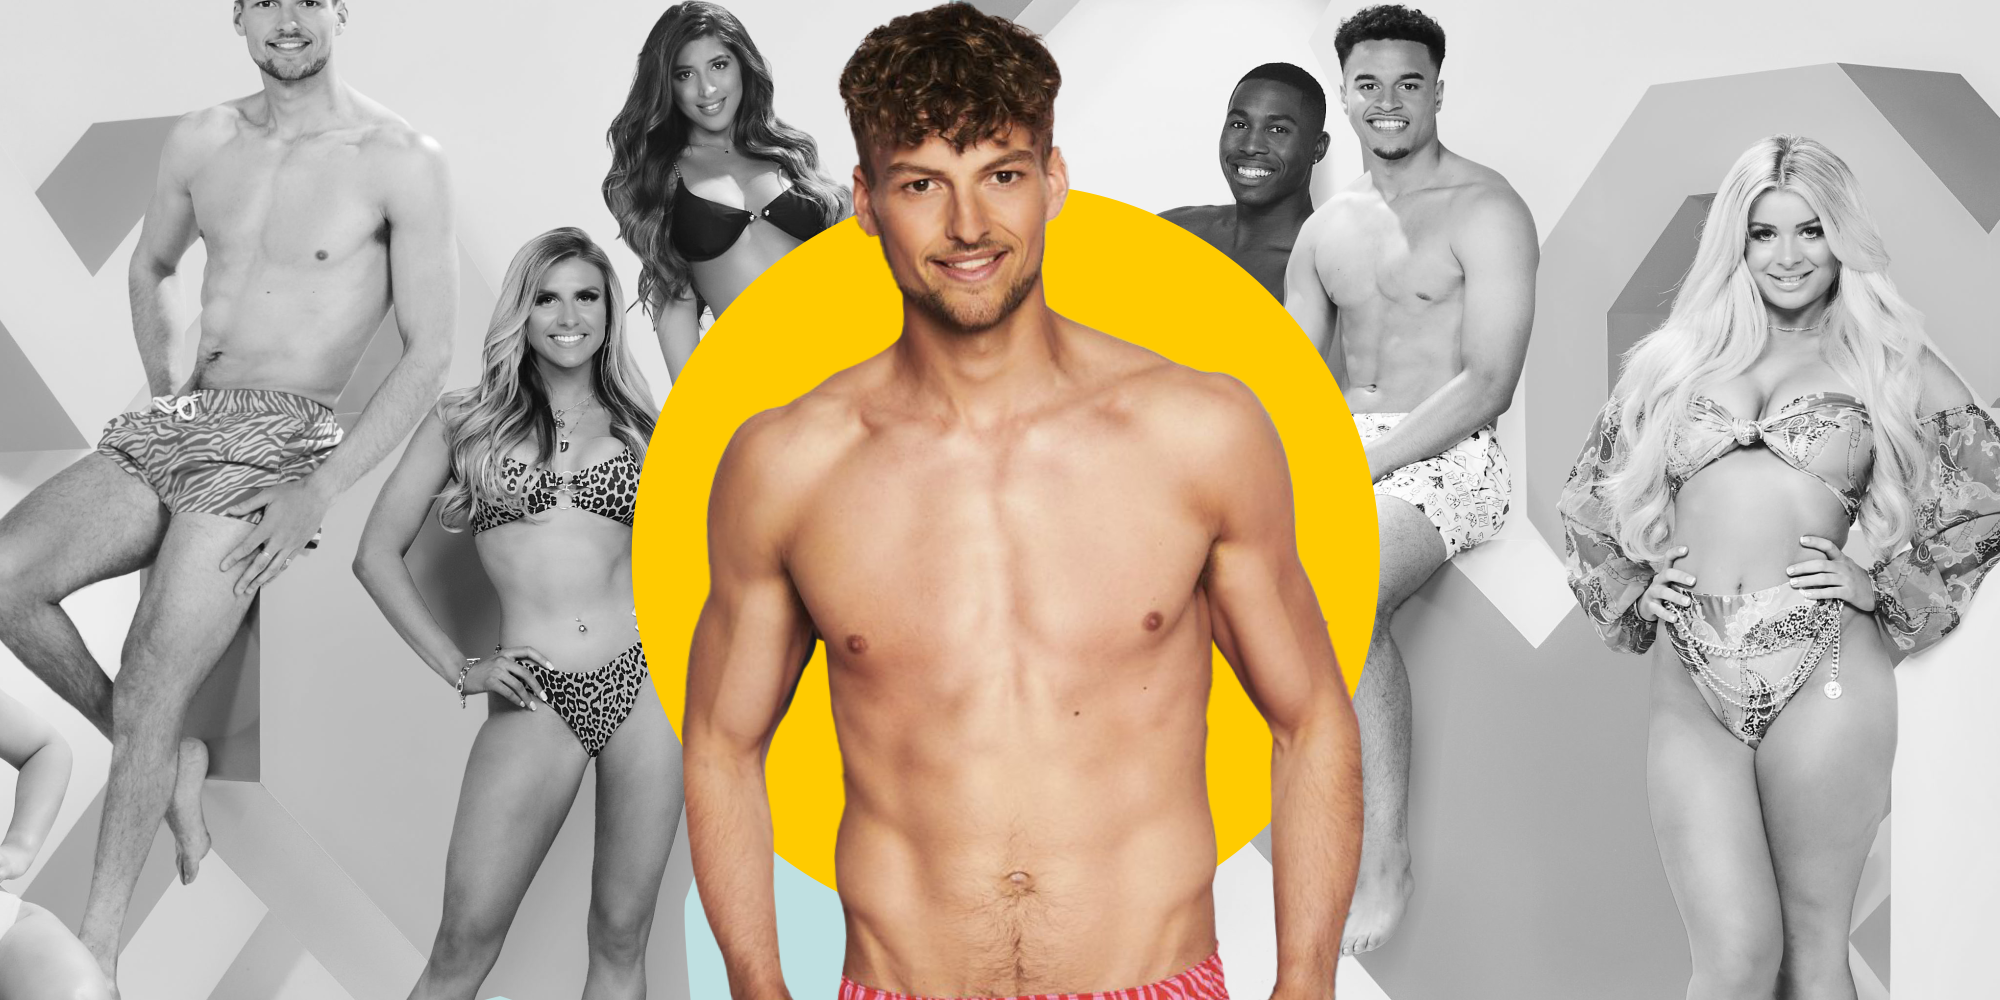 Love Island's Hugo has a disability, but he's not an inspiration